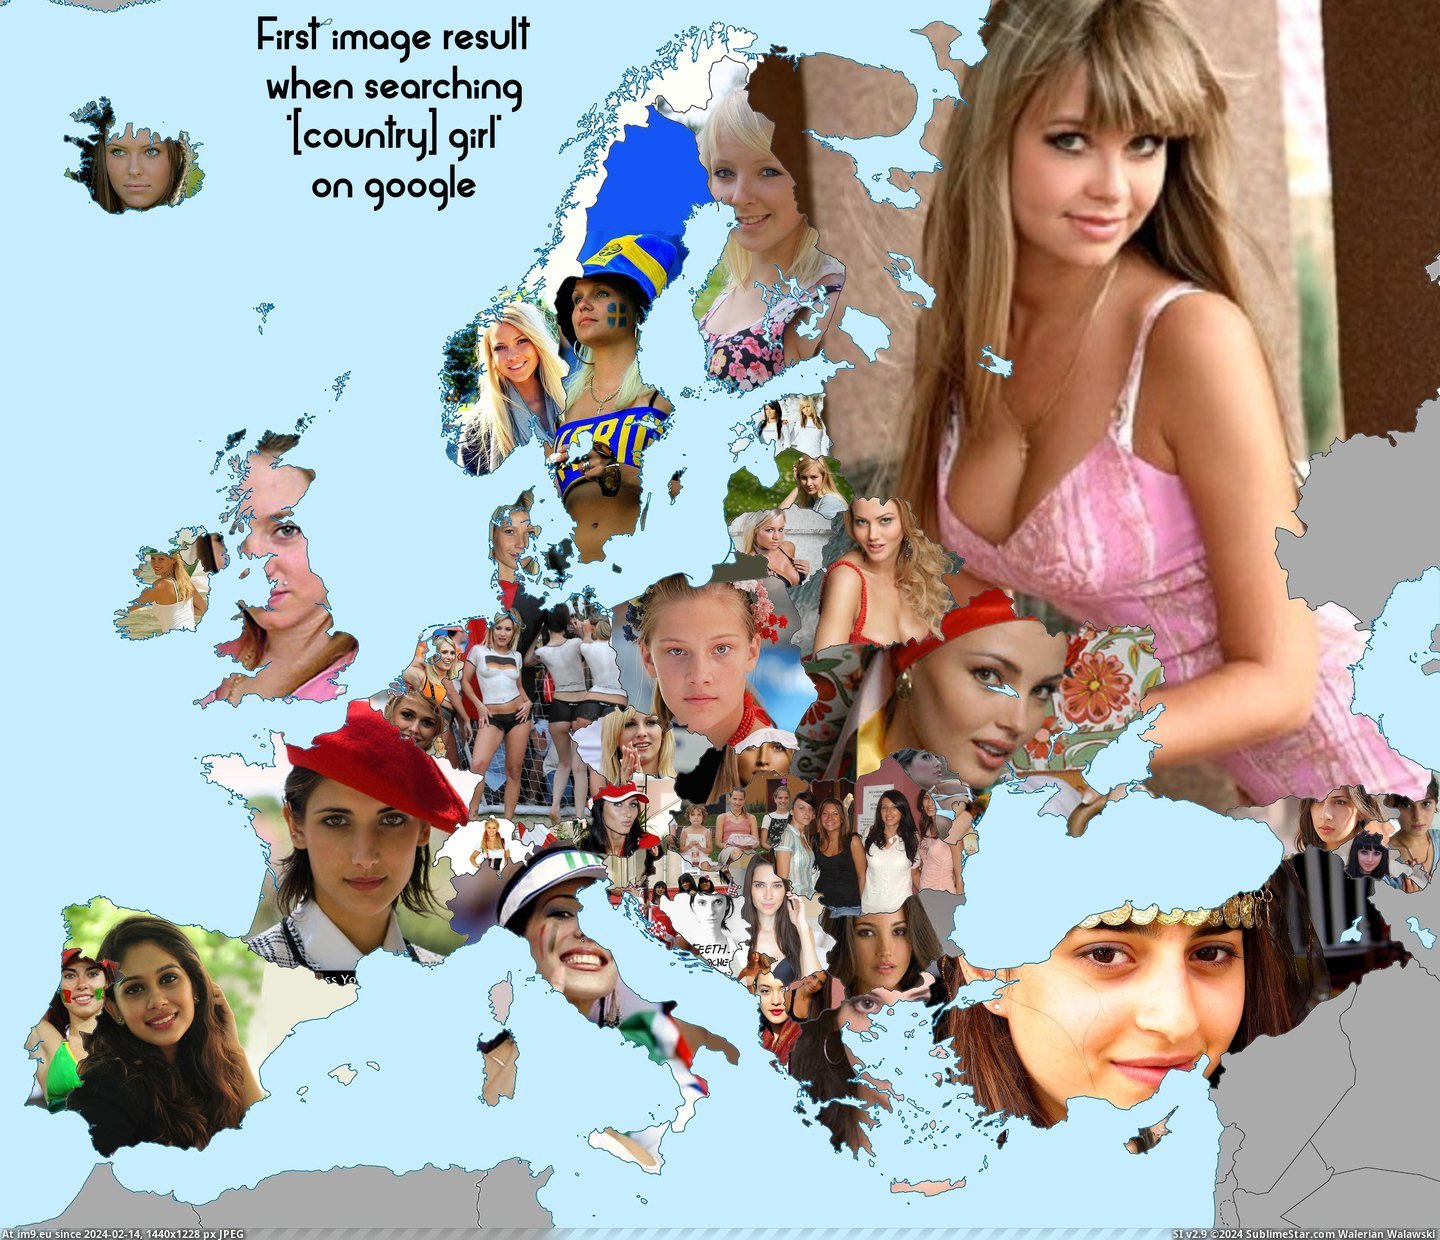 #Image #Girl #Country #Result #Searching #Map #Europe [Mapporn] Europe map with the first image result when searching '[country] girl]' [OC] [5000x4275] Pic. (Bild von album My r/MAPS favs))